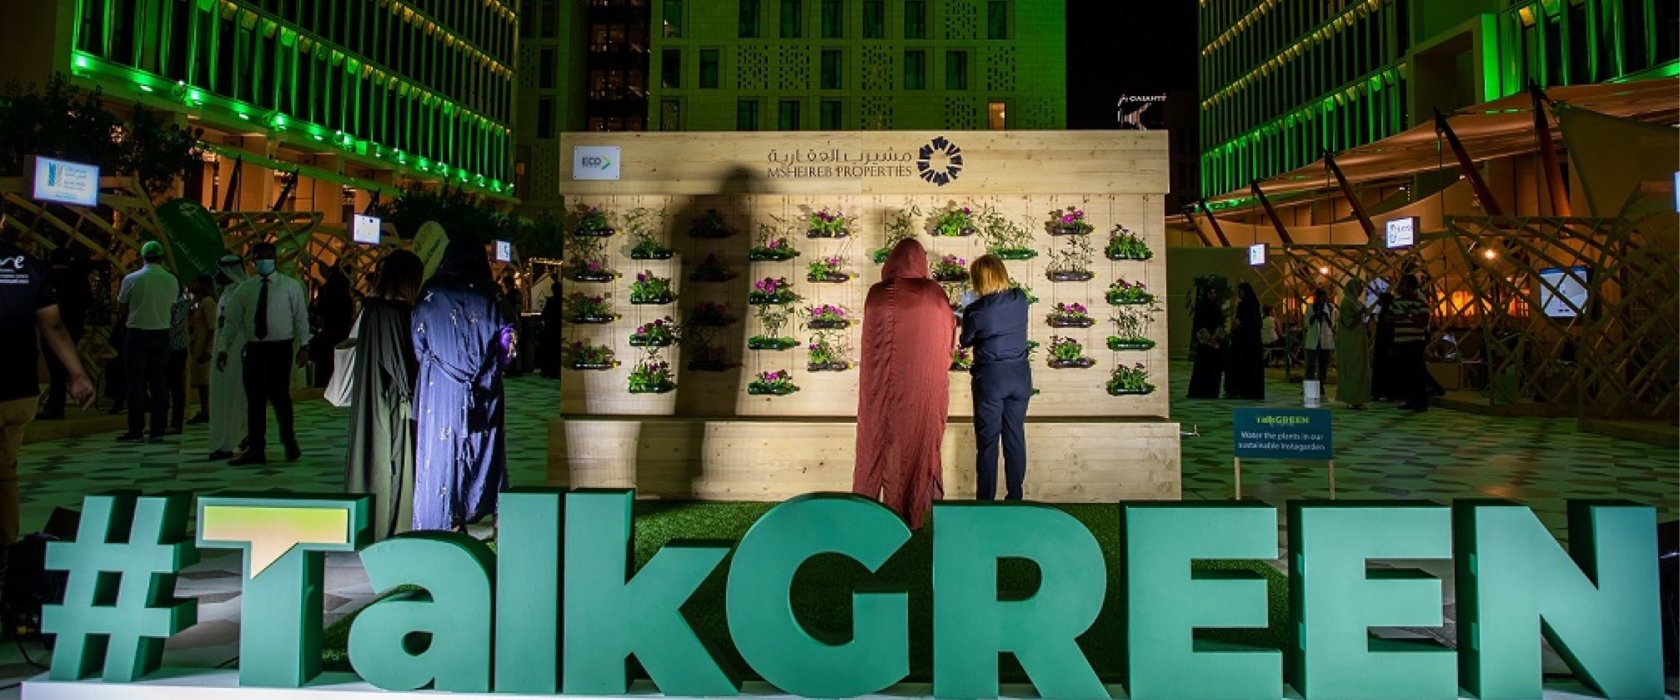 People are the key to making green cities work, Qatar Sustainability Week told